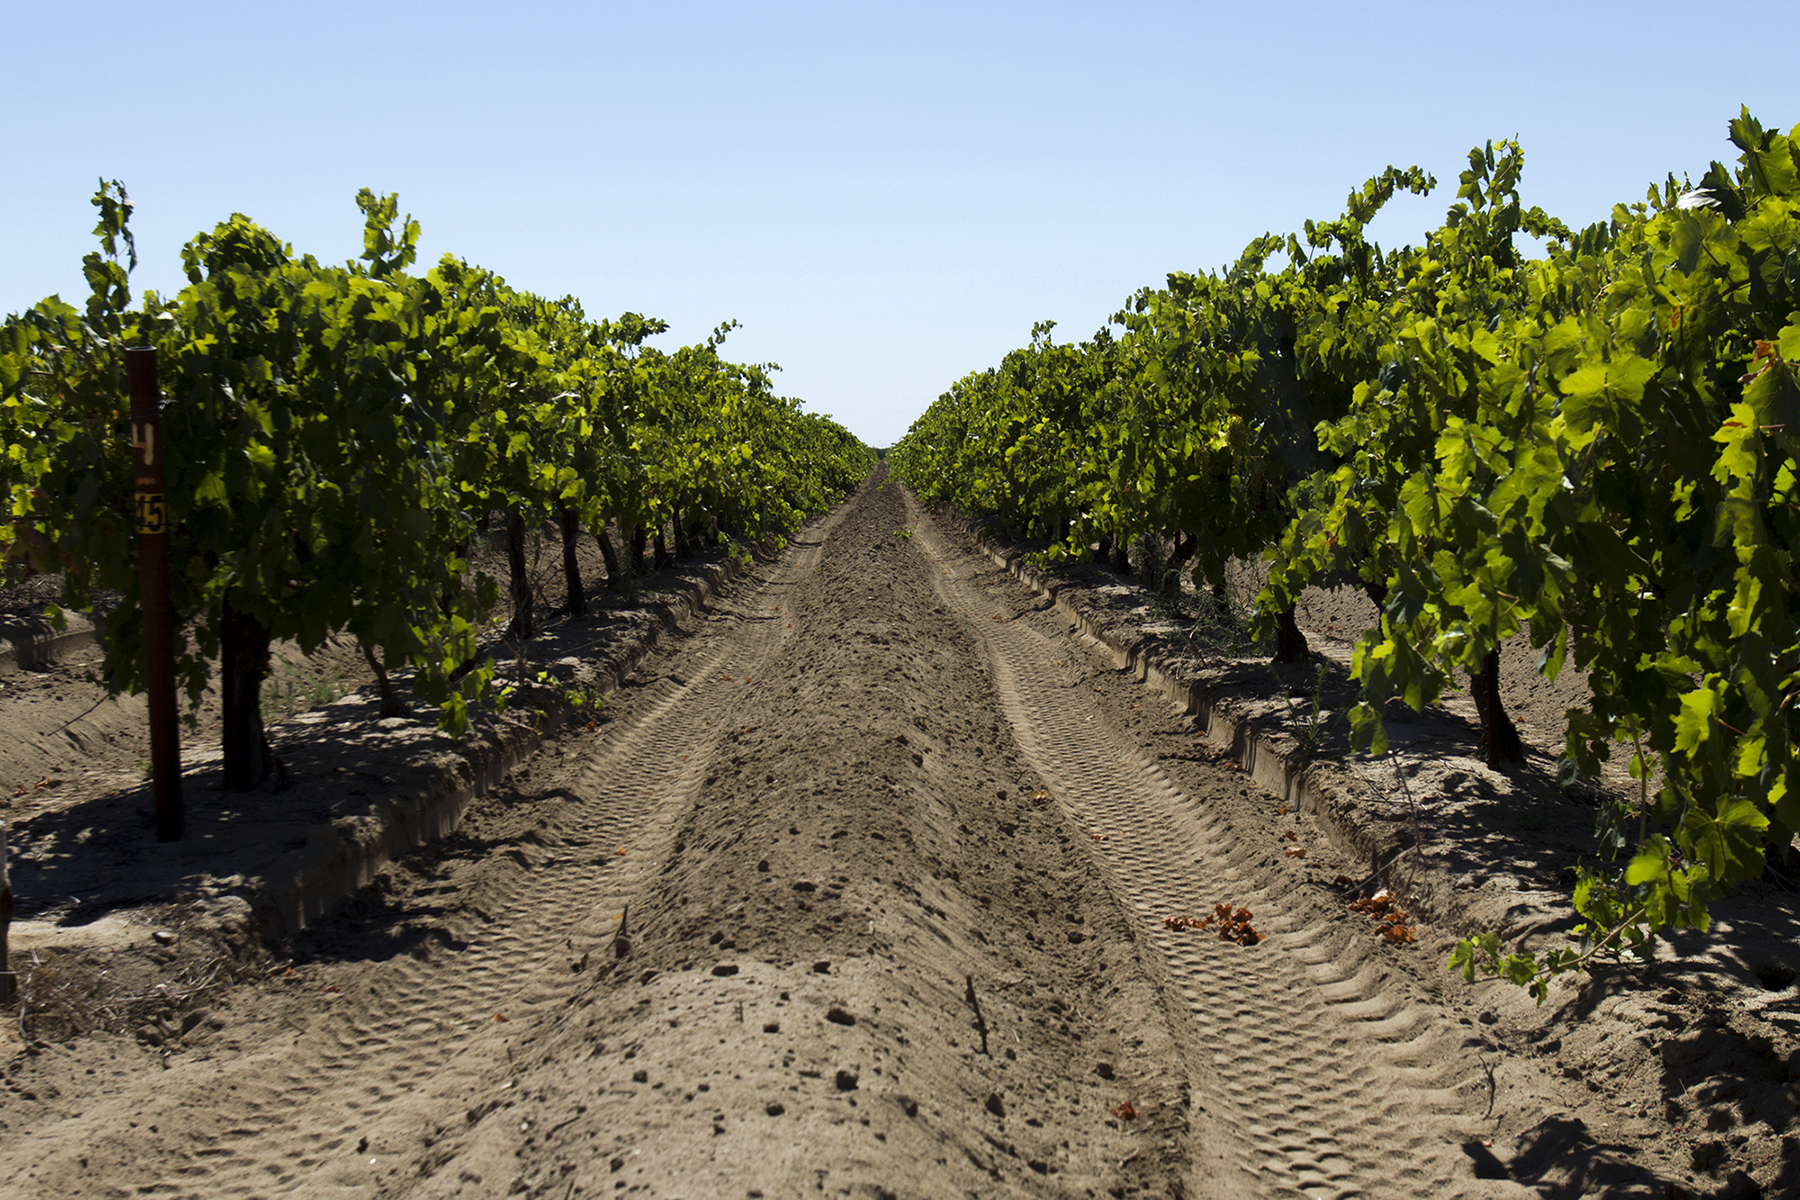 Madera, an agricultural town outside of Fresno, is lined with vineyards and nut tree groves. The town’s population is 78 percent Latino. (Alejandra Armstrong/News21)